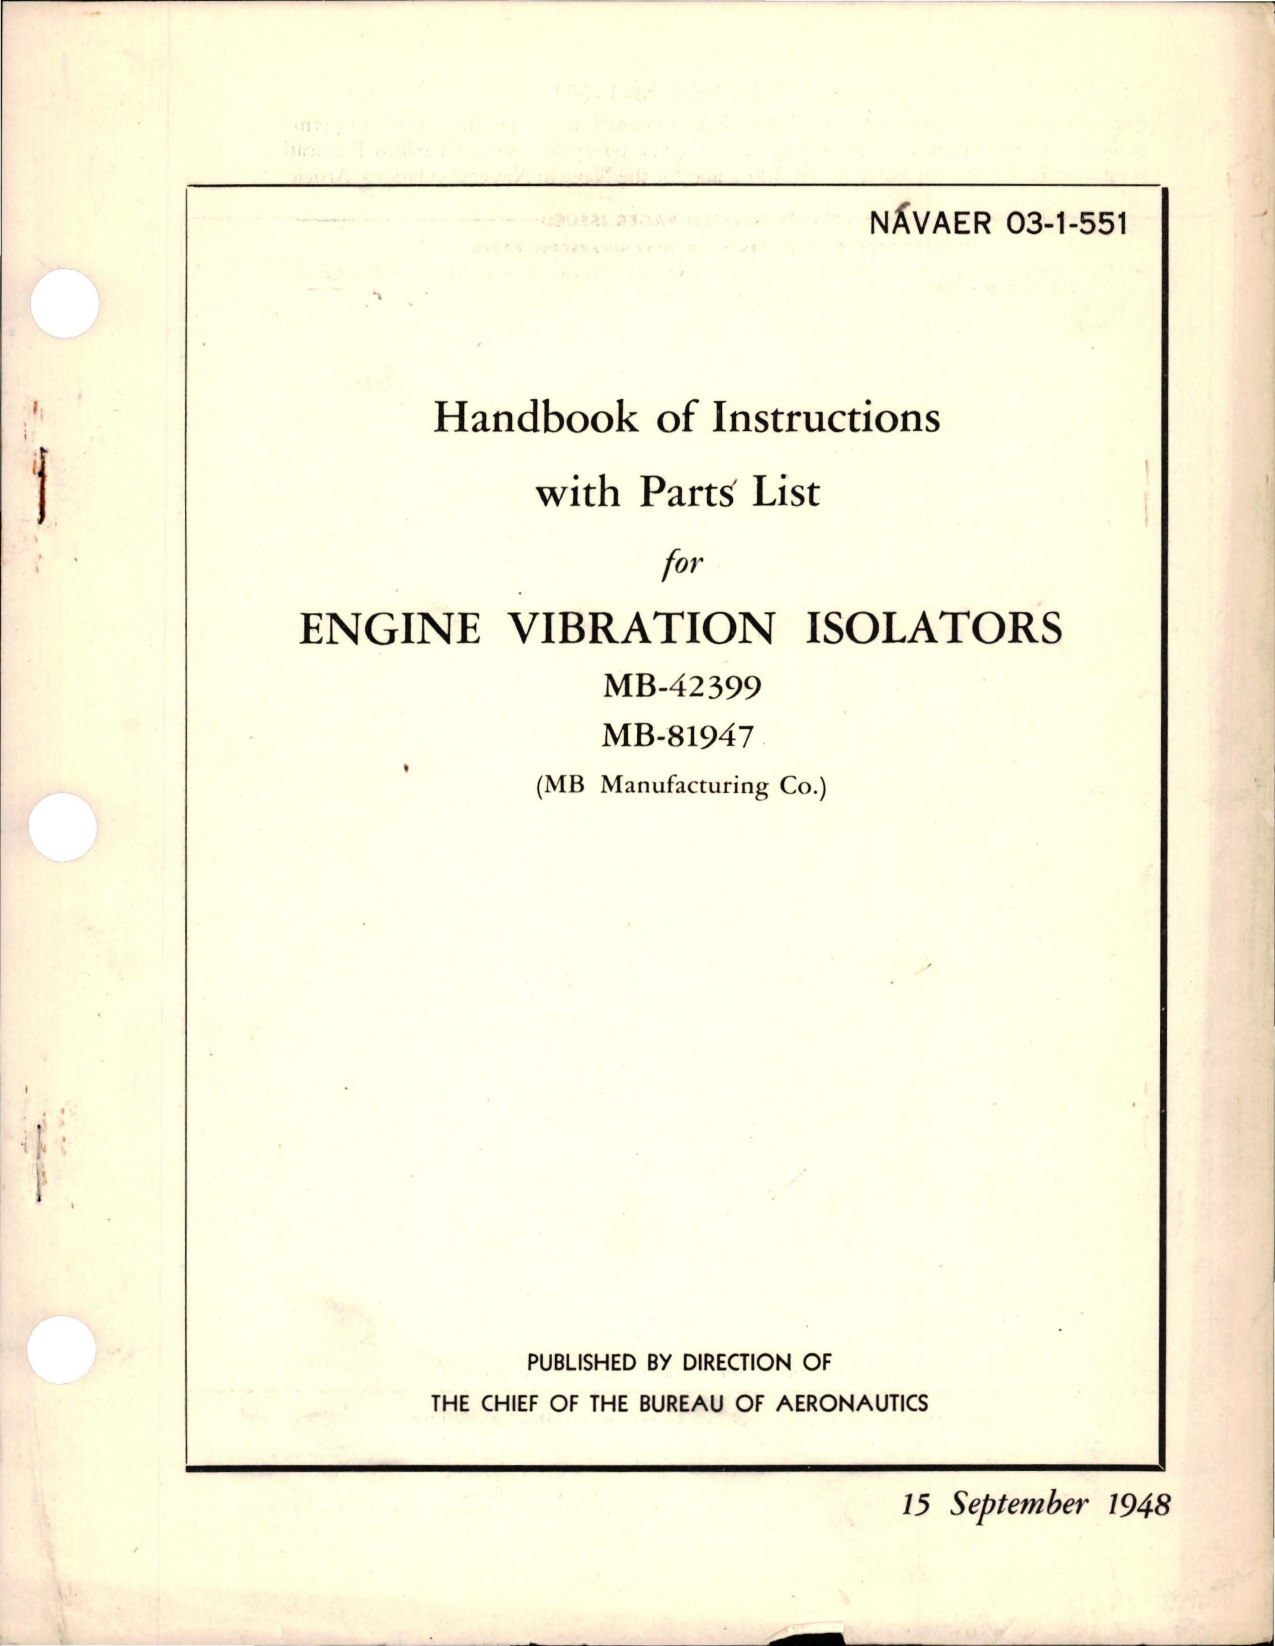 Sample page 1 from AirCorps Library document: Instructions with Parts List for Engine Vibration Isolators - MB-42399 and MB-81947